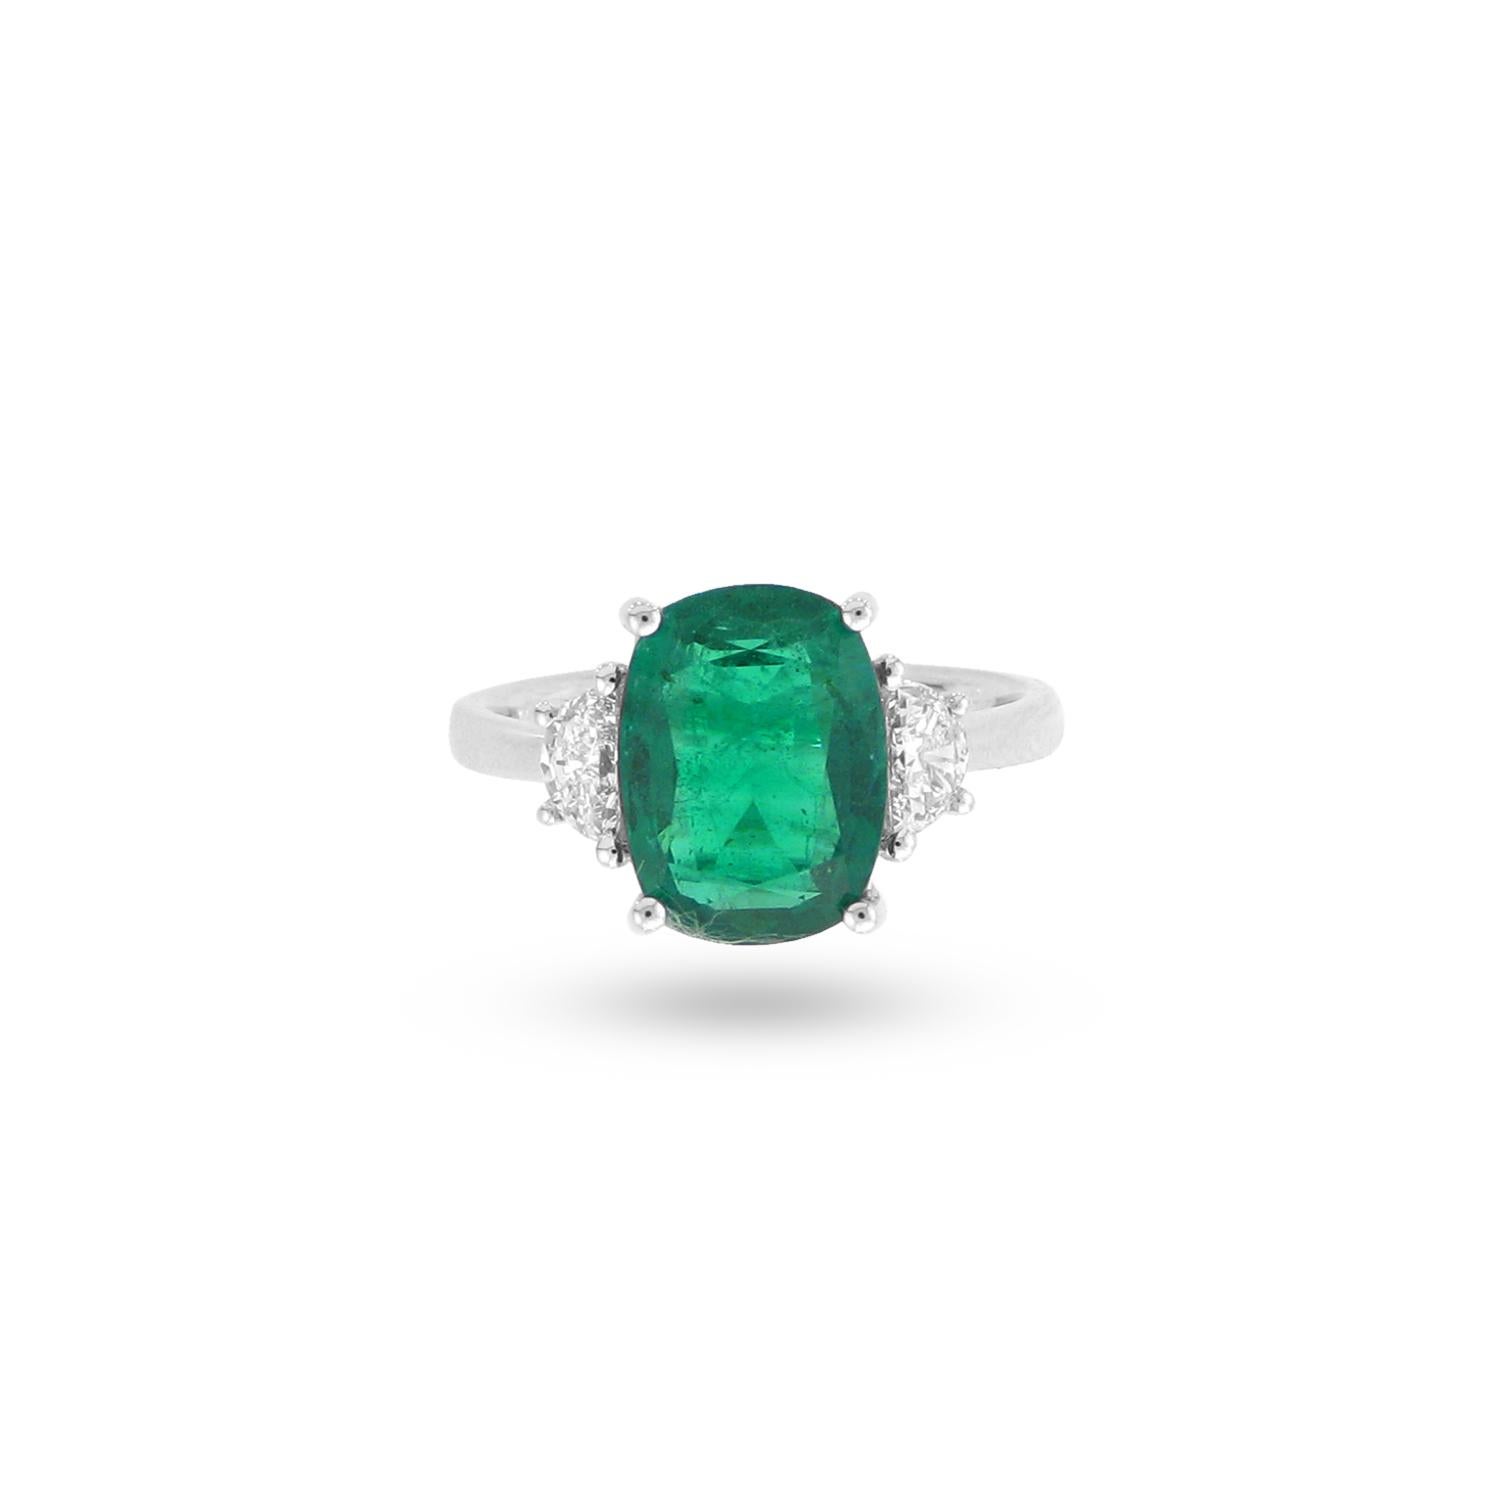 Bleau NY's latest collection. A beautiful three stone ring w/ one Elongated Cushion Emerald & Two Half Moon Diamonds:

Elongated Cushion Emerald - 3.50ct
Half Moon Diamonds - .37ct
Ring Metal - 18k White Gold
Item Ref #17937